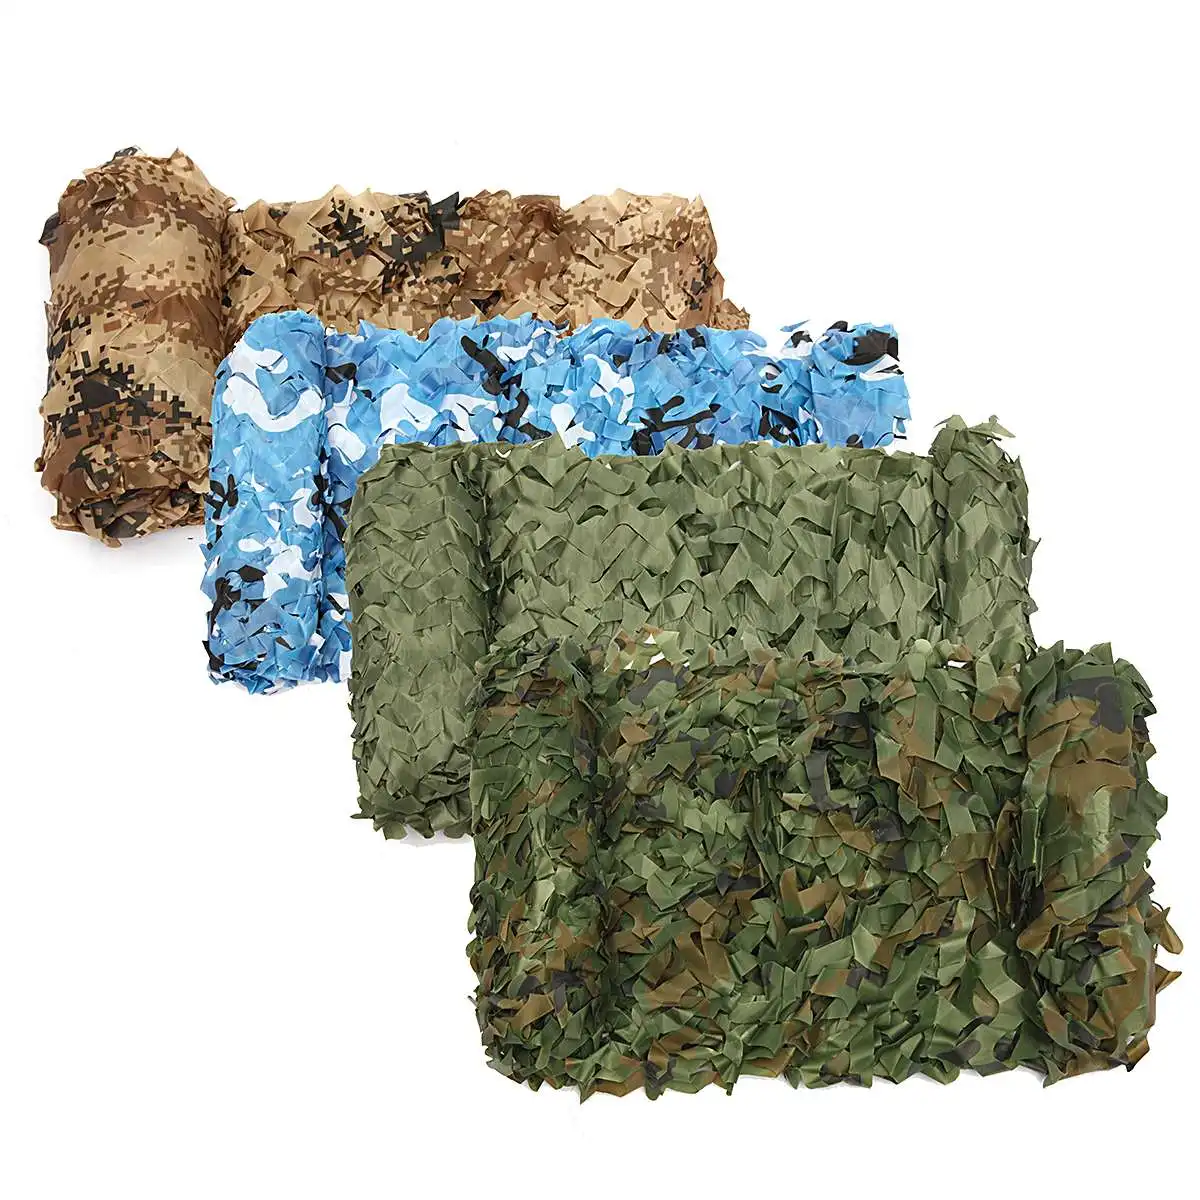 Image 4m*2m Hunting Military Camouflage Net Woodland Army Camo netting Camping Sun ShelterTent Shade sun shelter